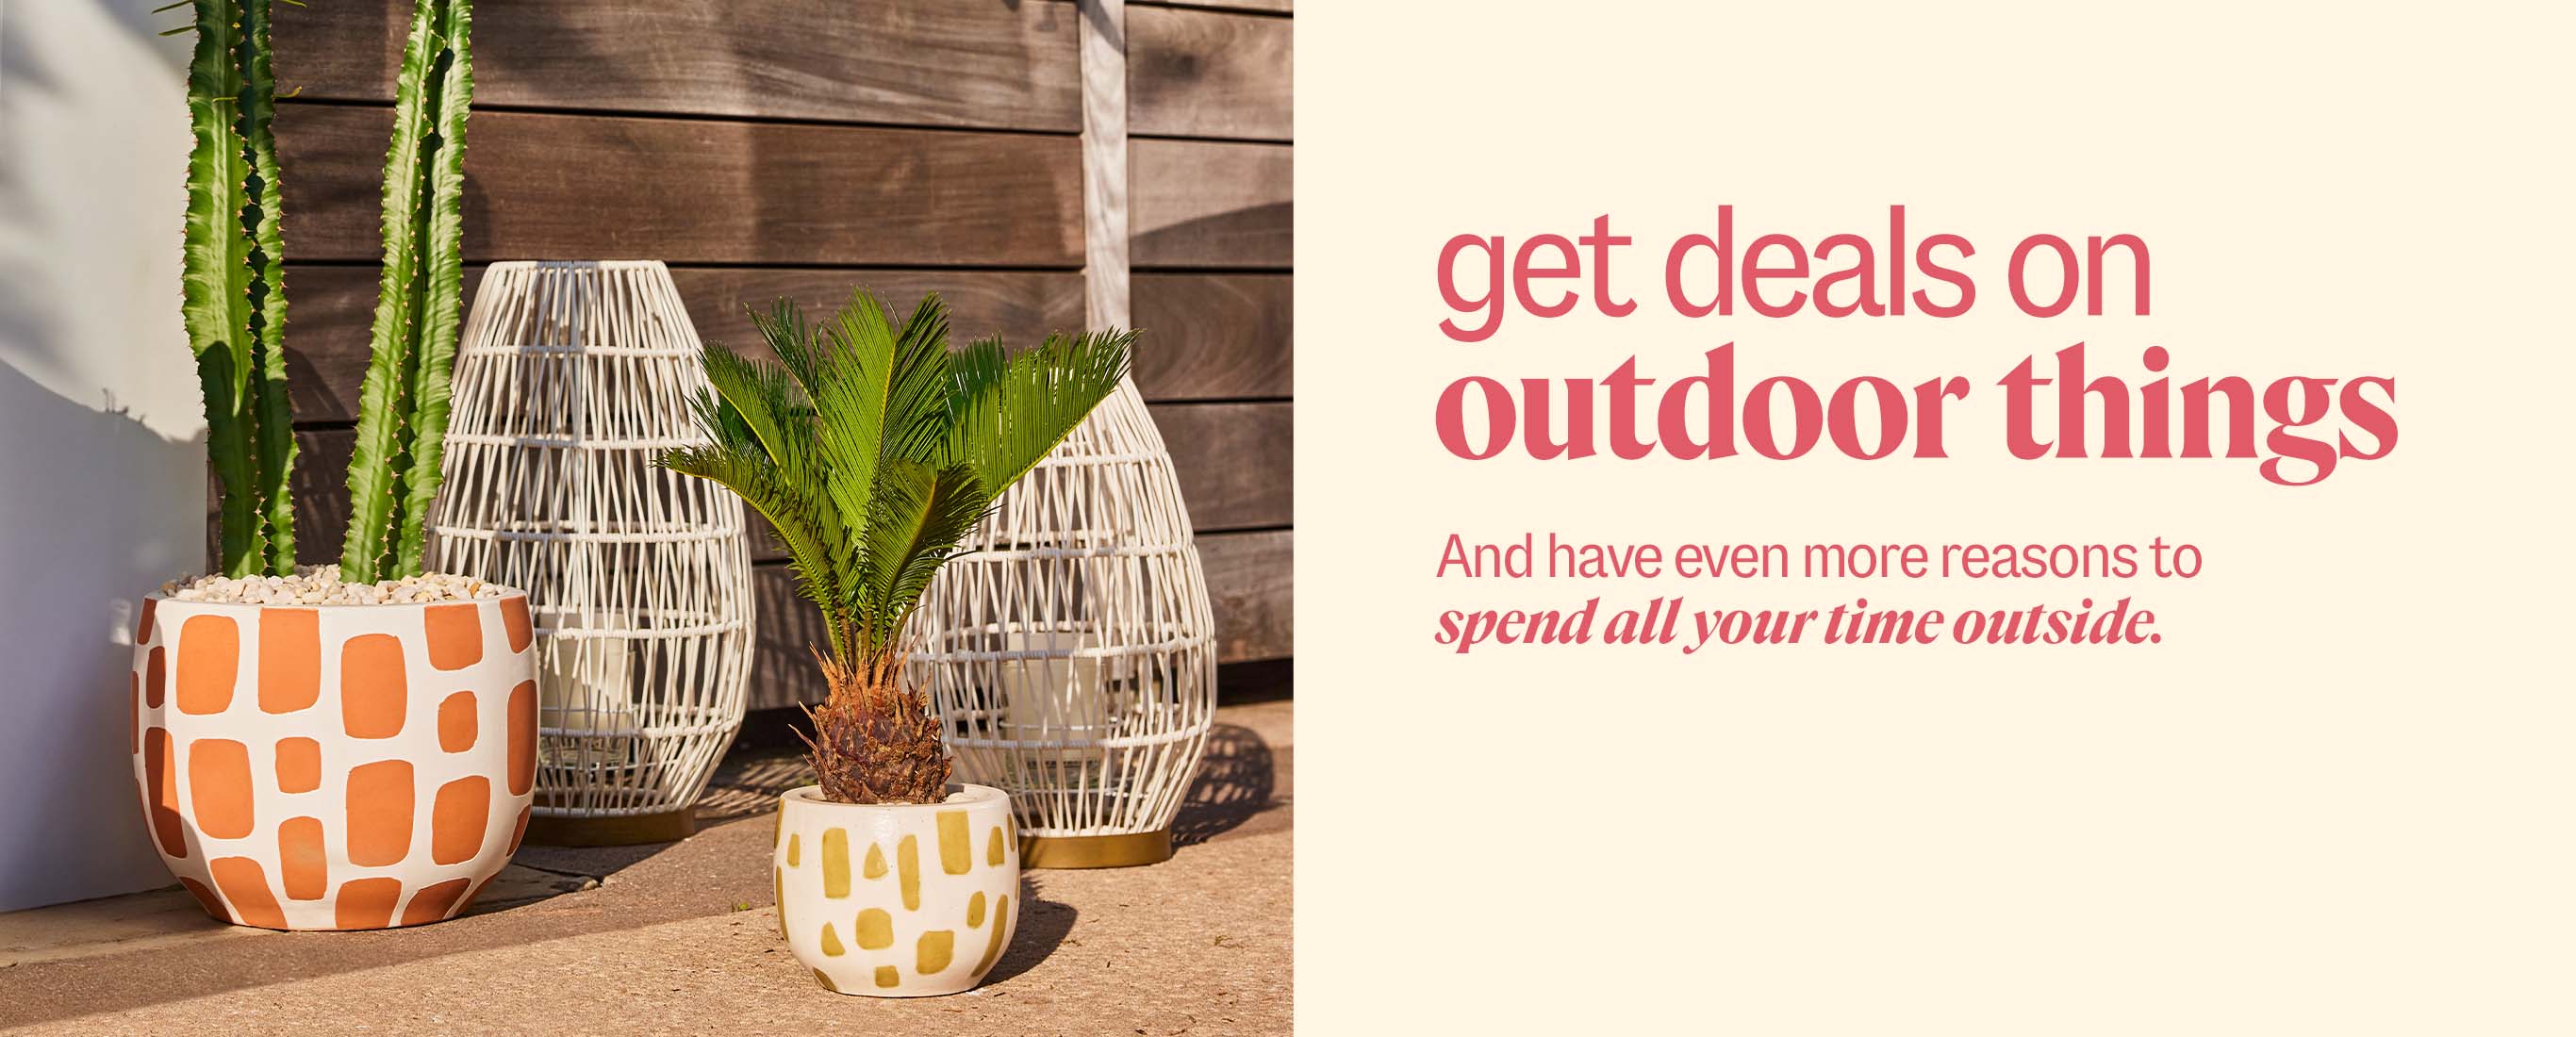 get deals on outdoor things. And have even more reasons to spend all your time outside.